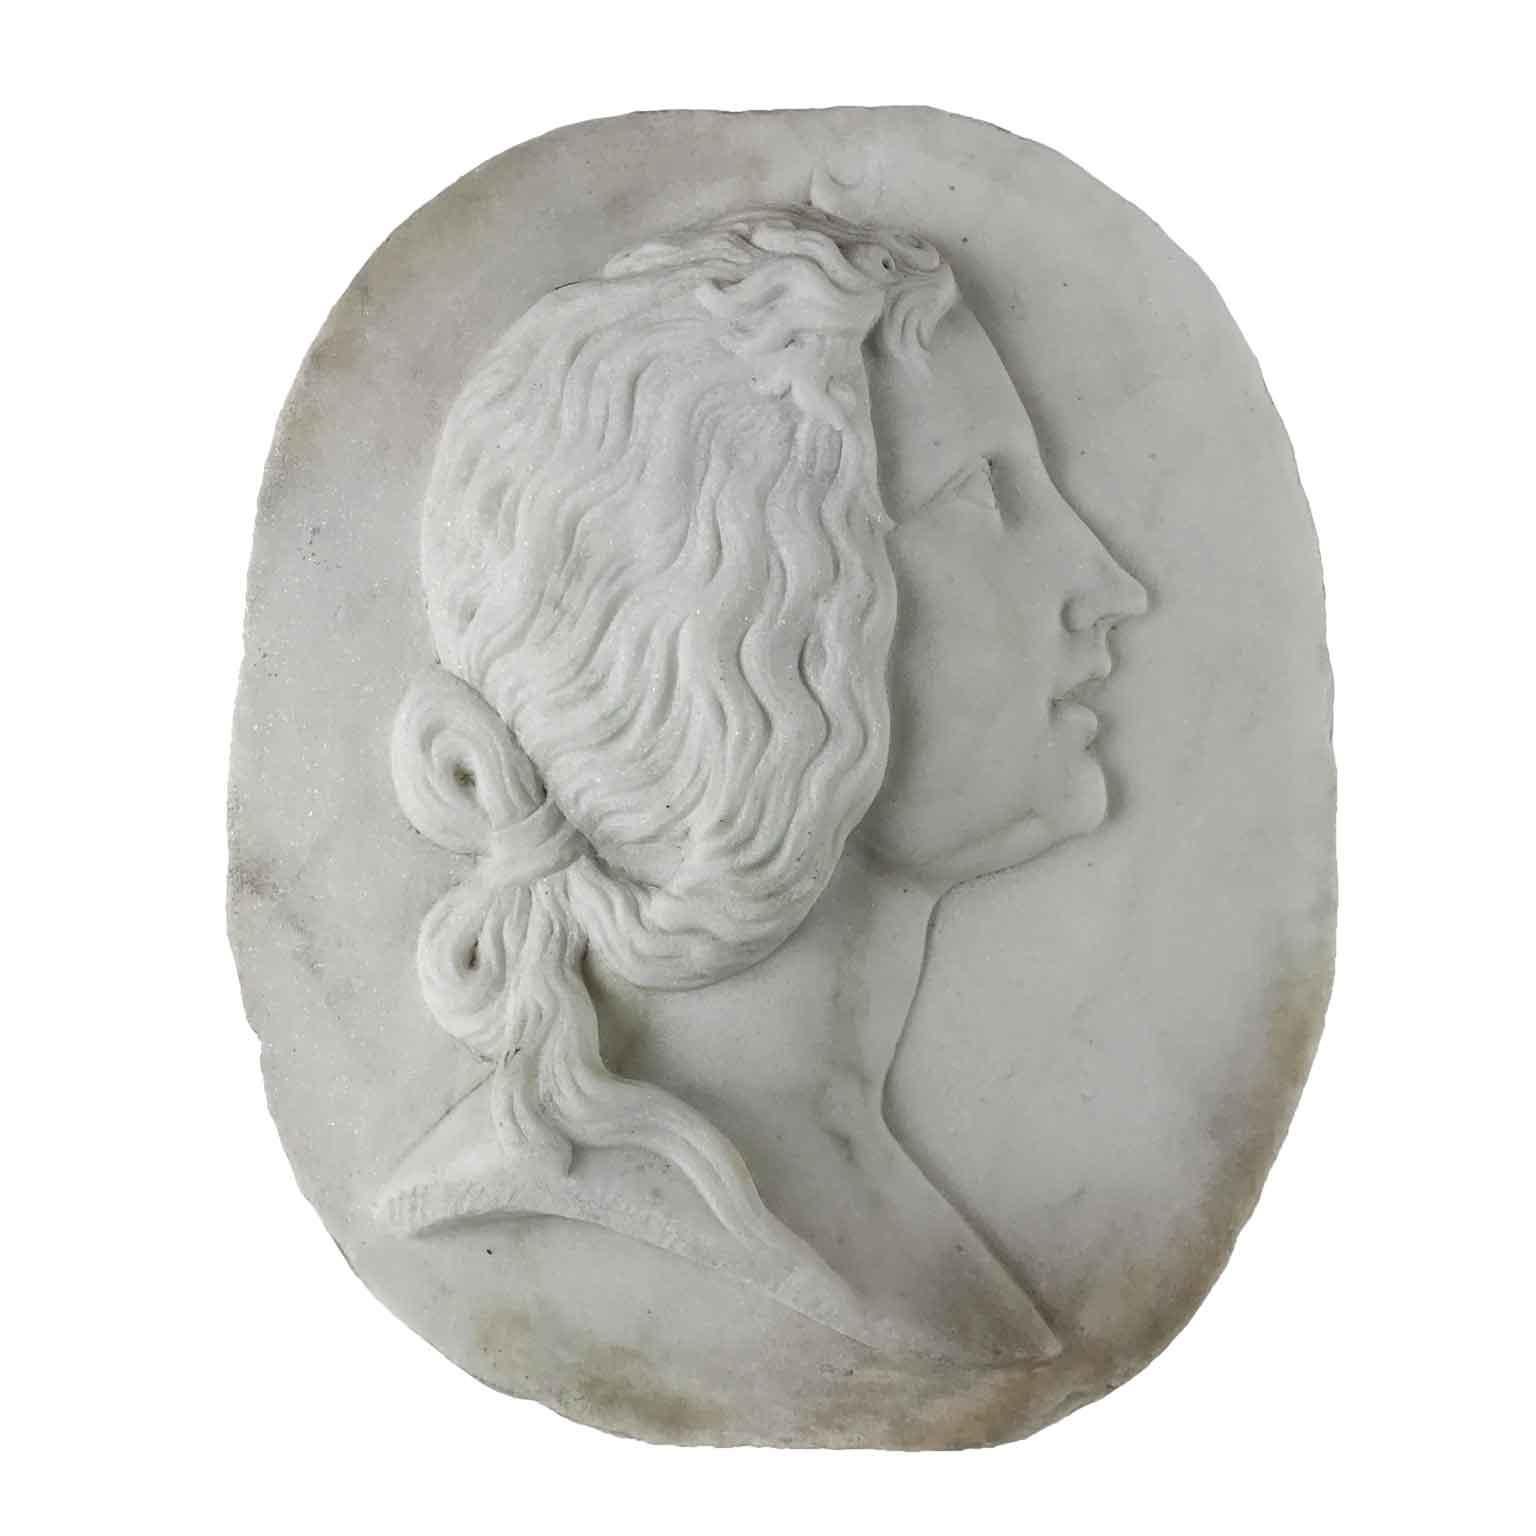 An oval Italian Carrara marble relief plaque, an early 20th century hand-carved marble profile lady portrait, depicting a female head, possible Artemis or Diana Goddes, a woman with long wavy hair tied with a ribbon behind her neck, portrayed in